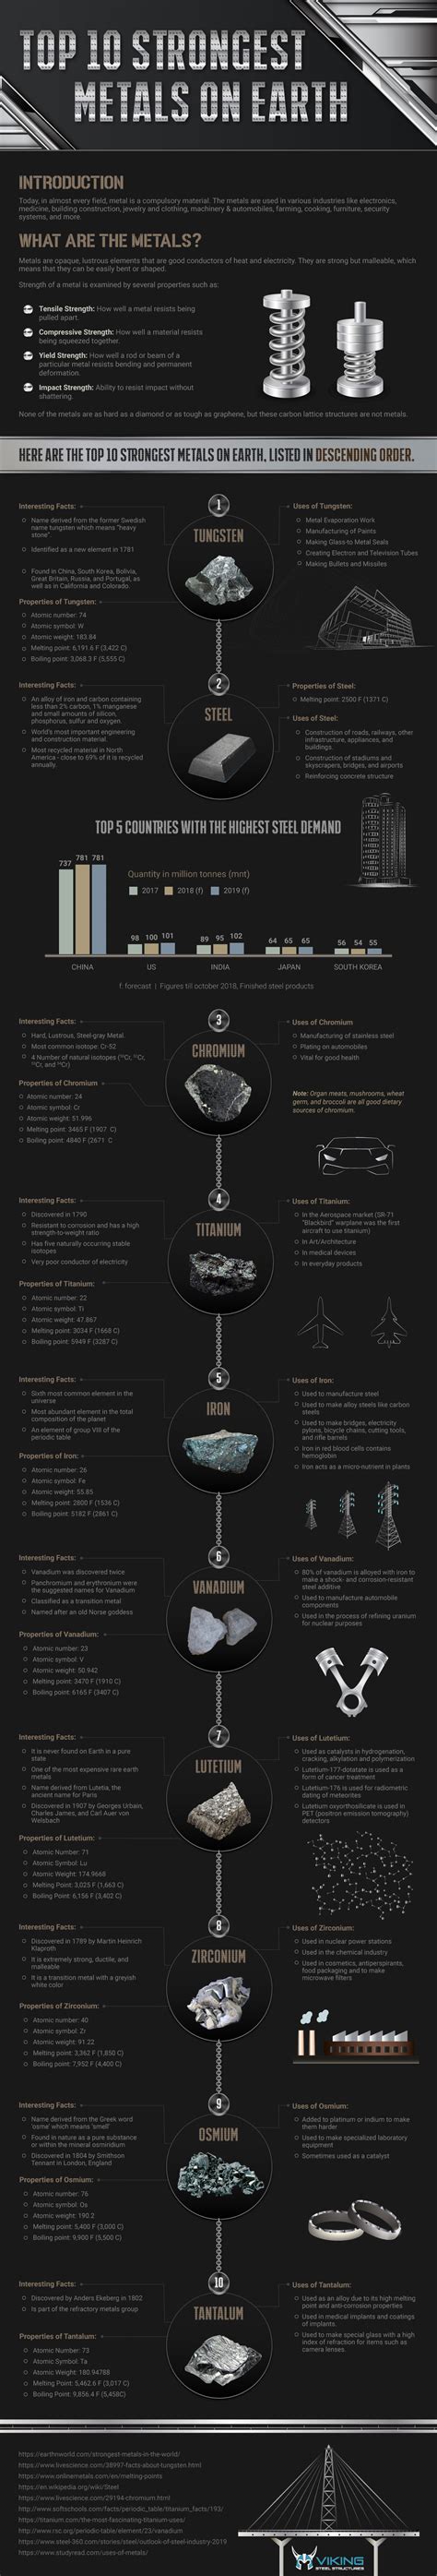 Top 10 Strongest Metals On Earth Infographic